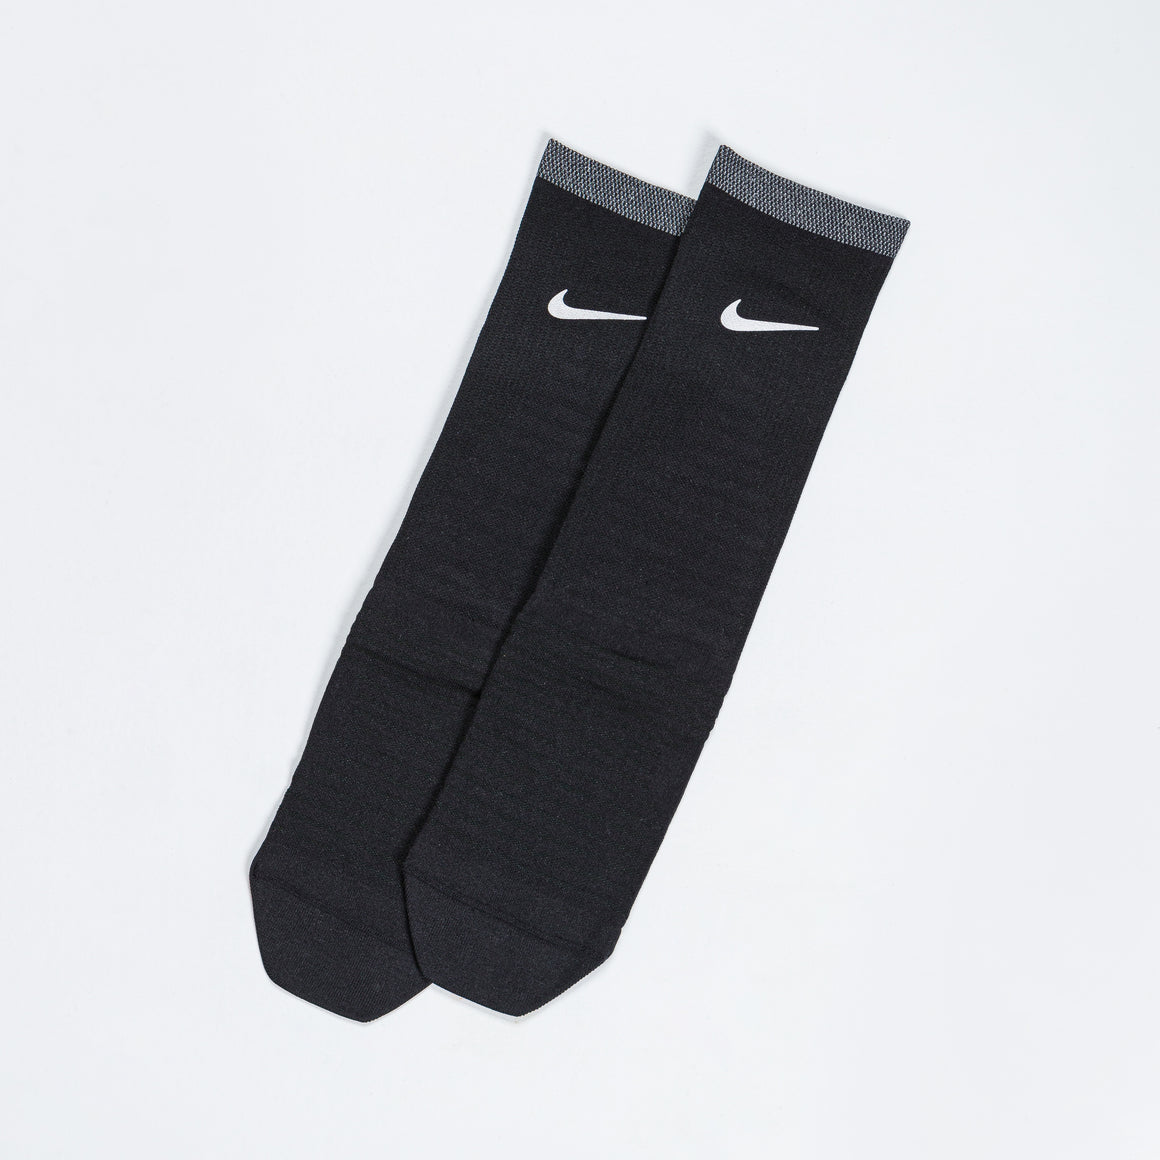 Nike - Spark Lightweight Crew - Black/Reflective Silver - Up There Athletics